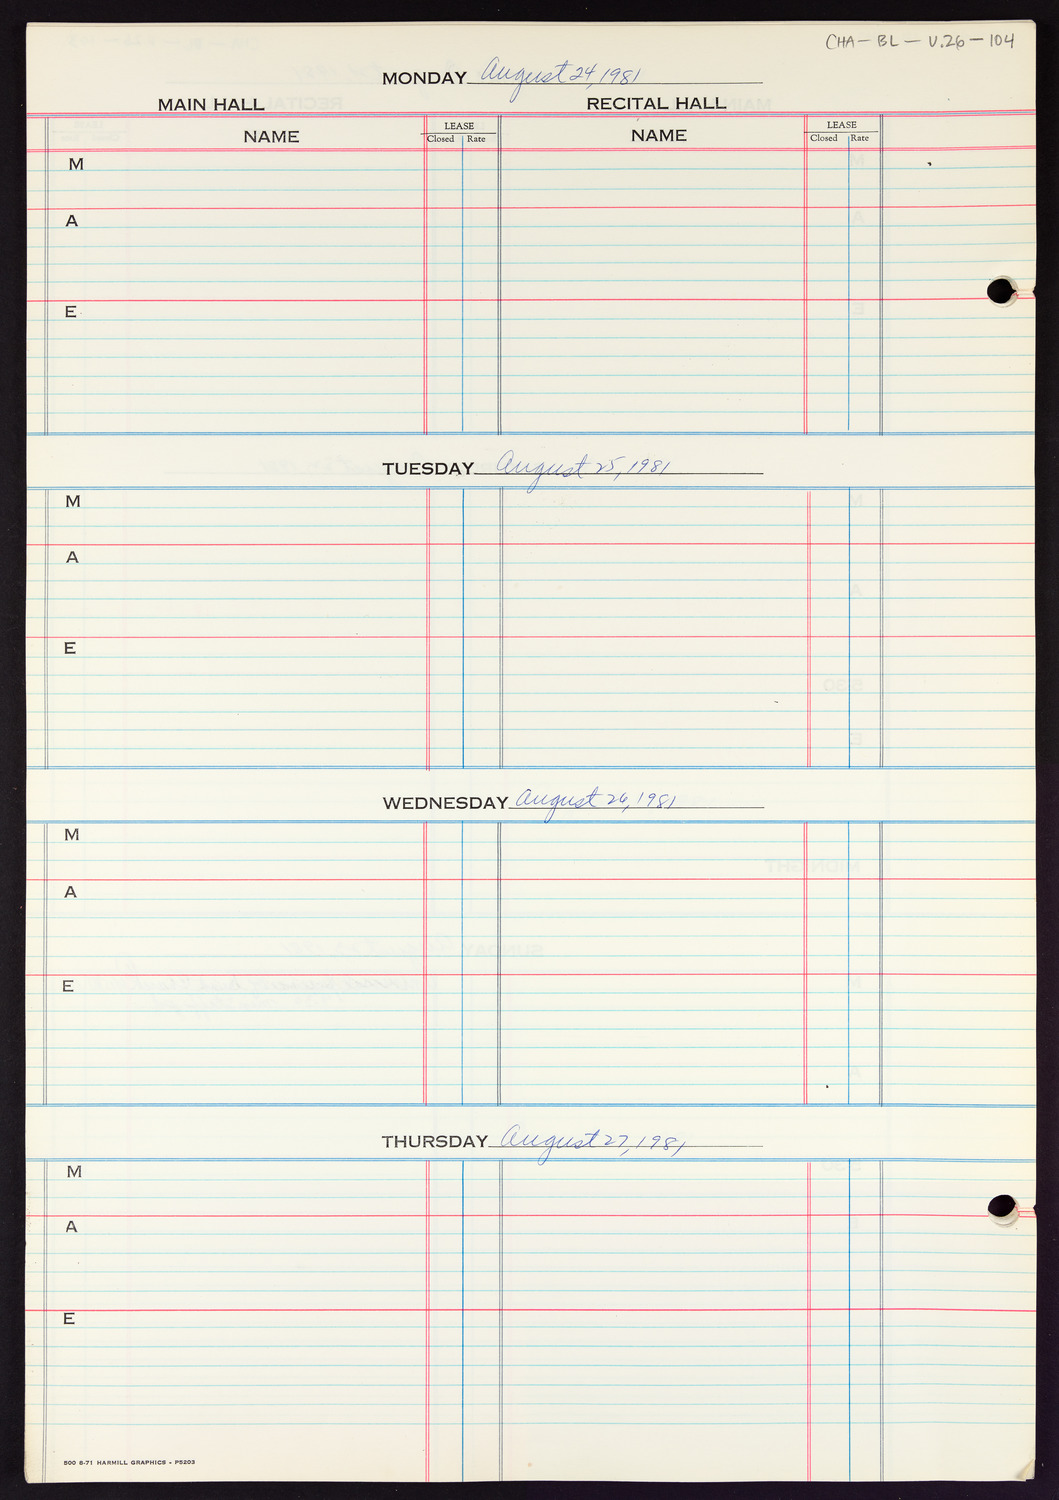 Carnegie Hall Booking Ledger, volume 26, page 104